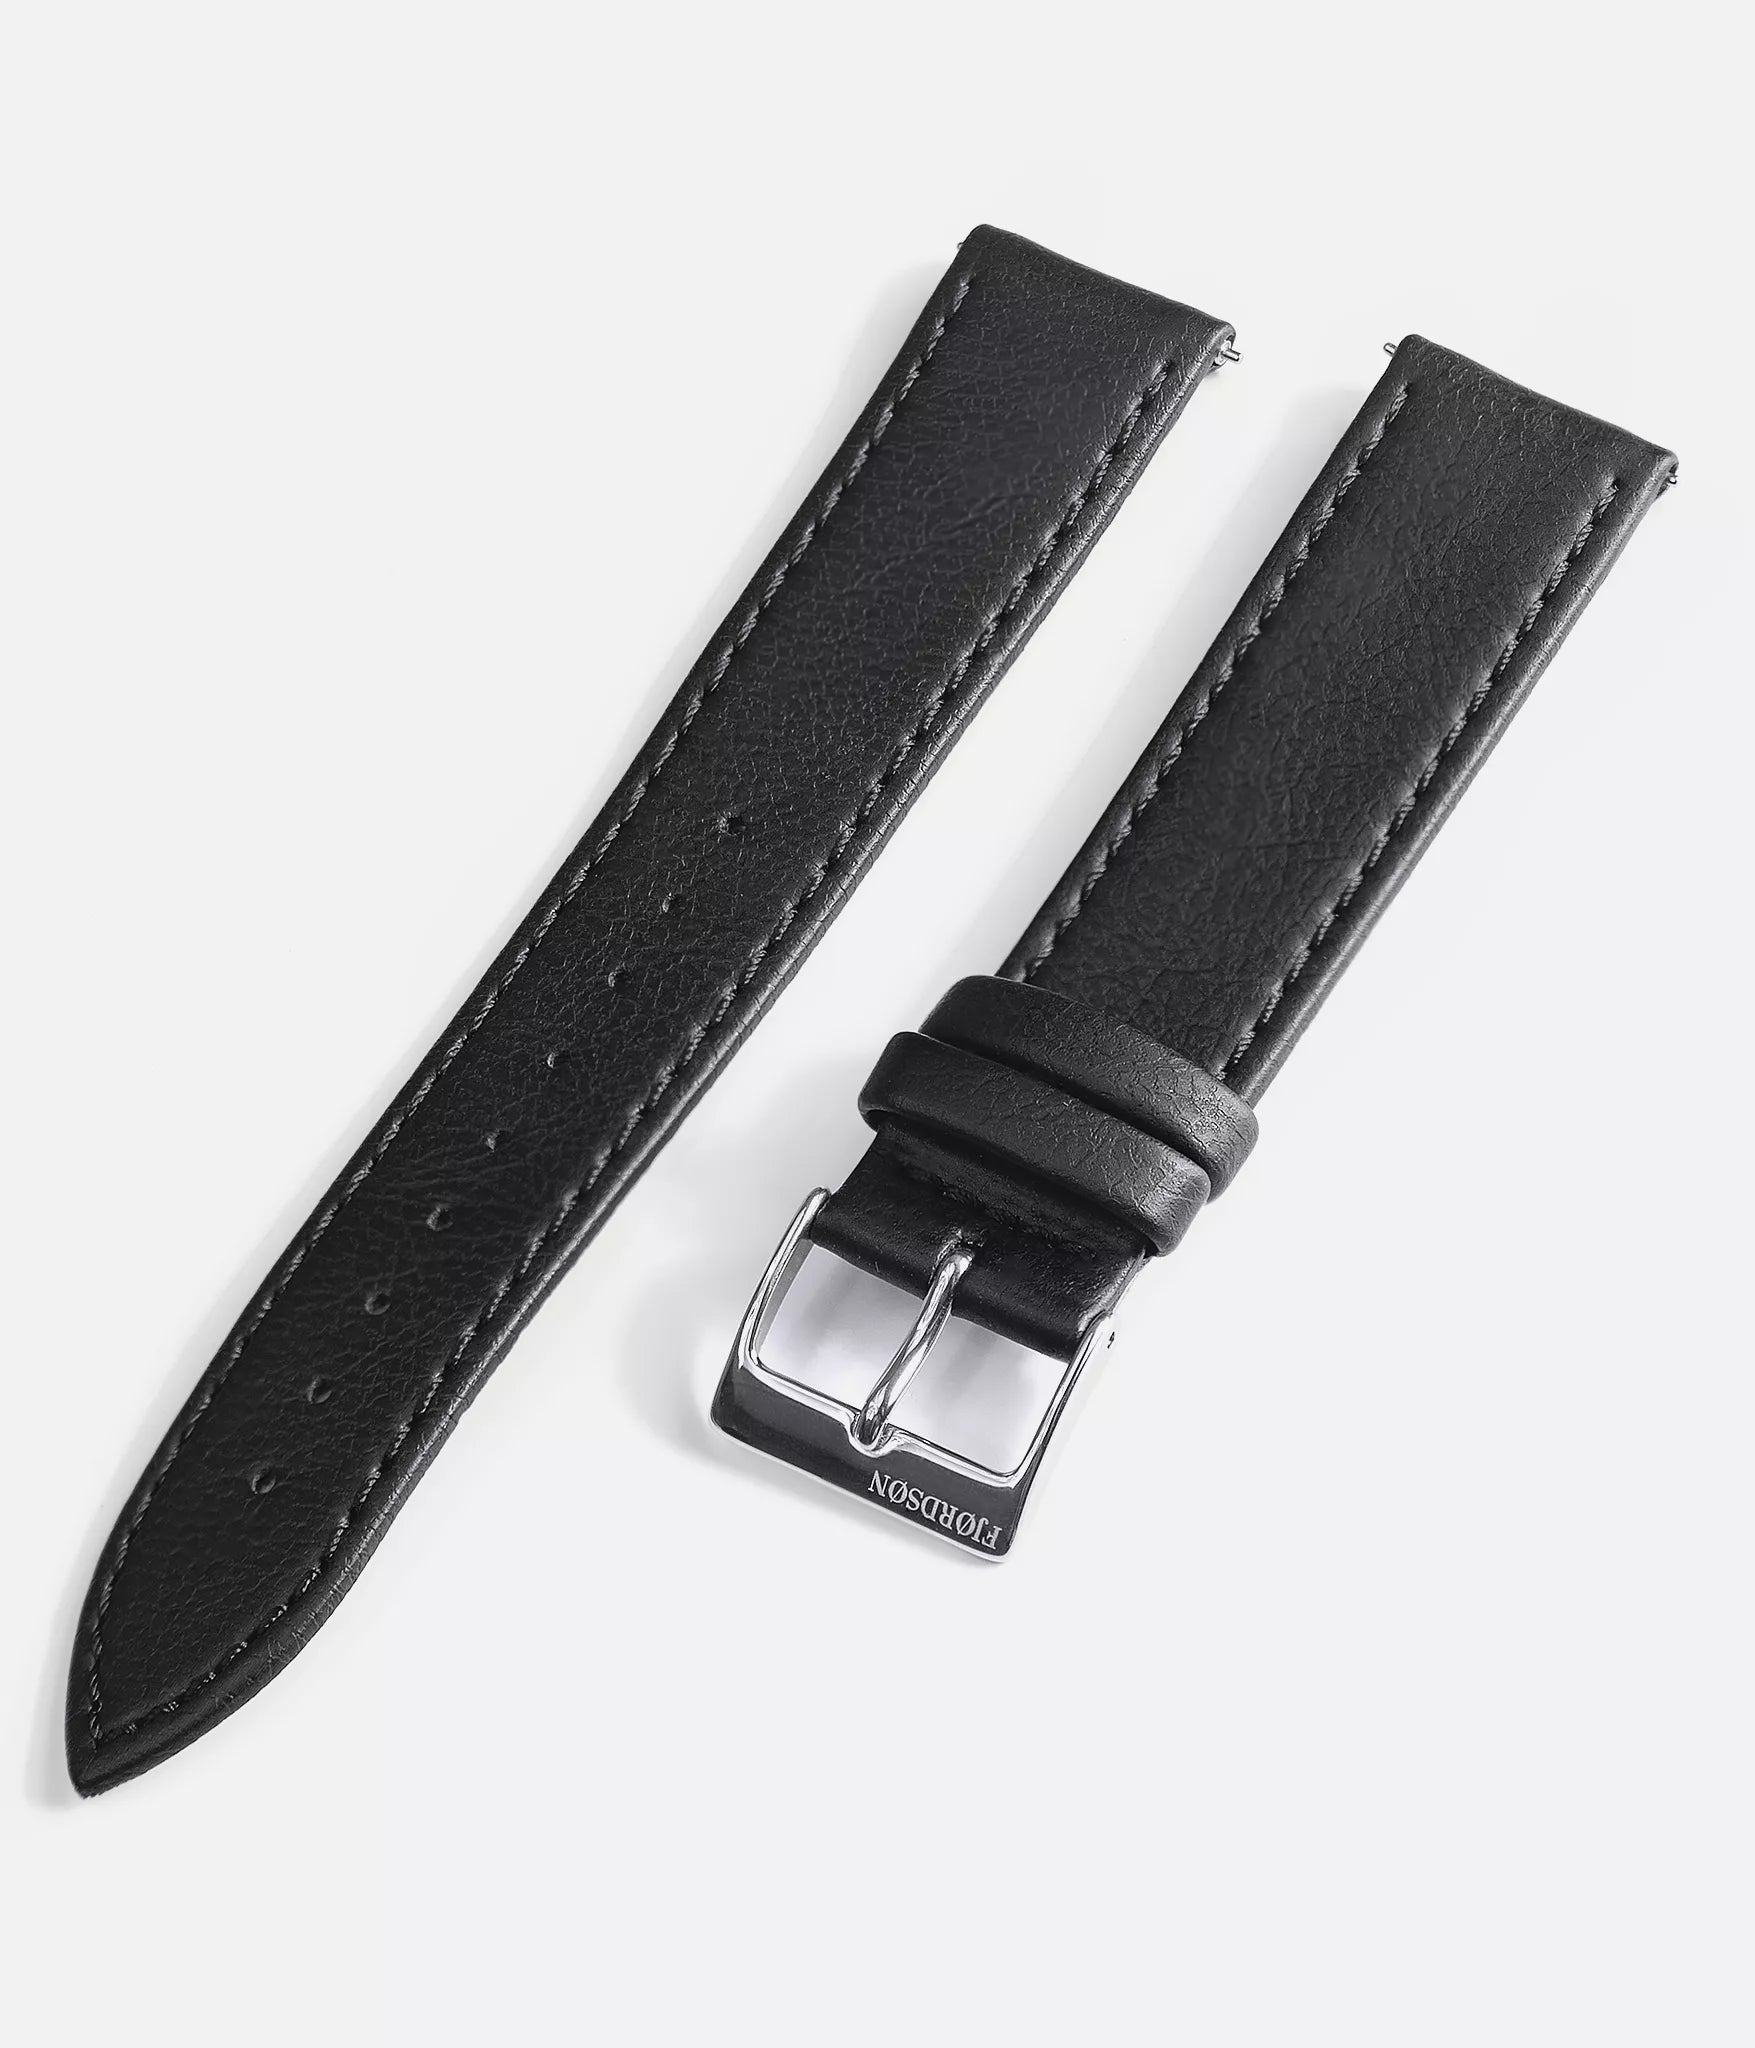 Watch strap shot - Fjordson watch with white dial and black vegan leather watch strap - UNISEX - vegan & approved by PETA - Swiss made